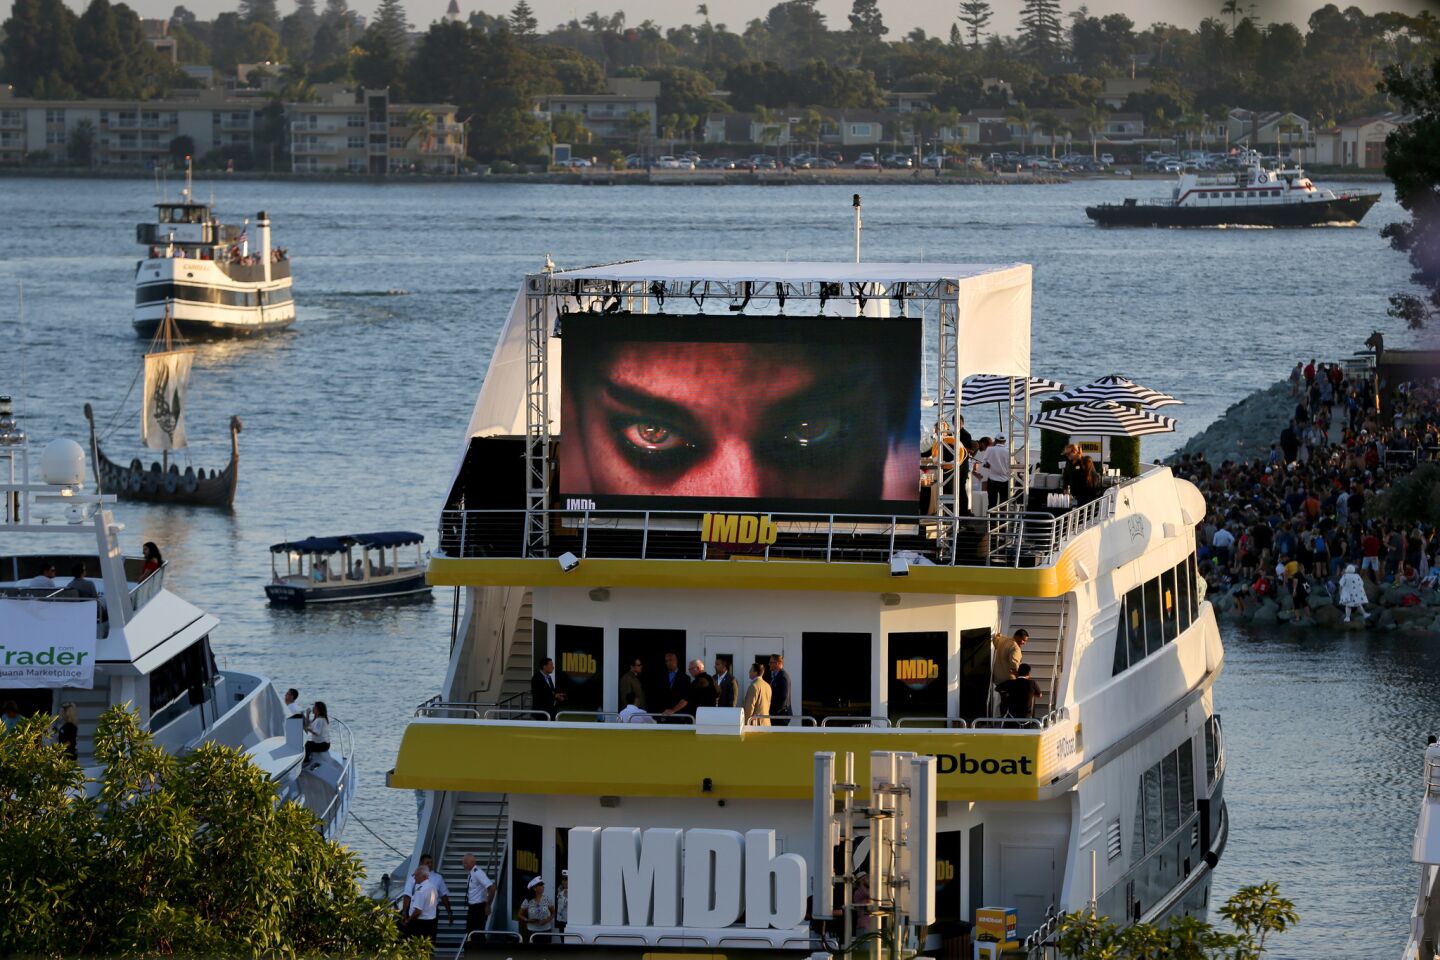 The IMDb boat hosts a party at Comic-Con International on July 21, 2017.